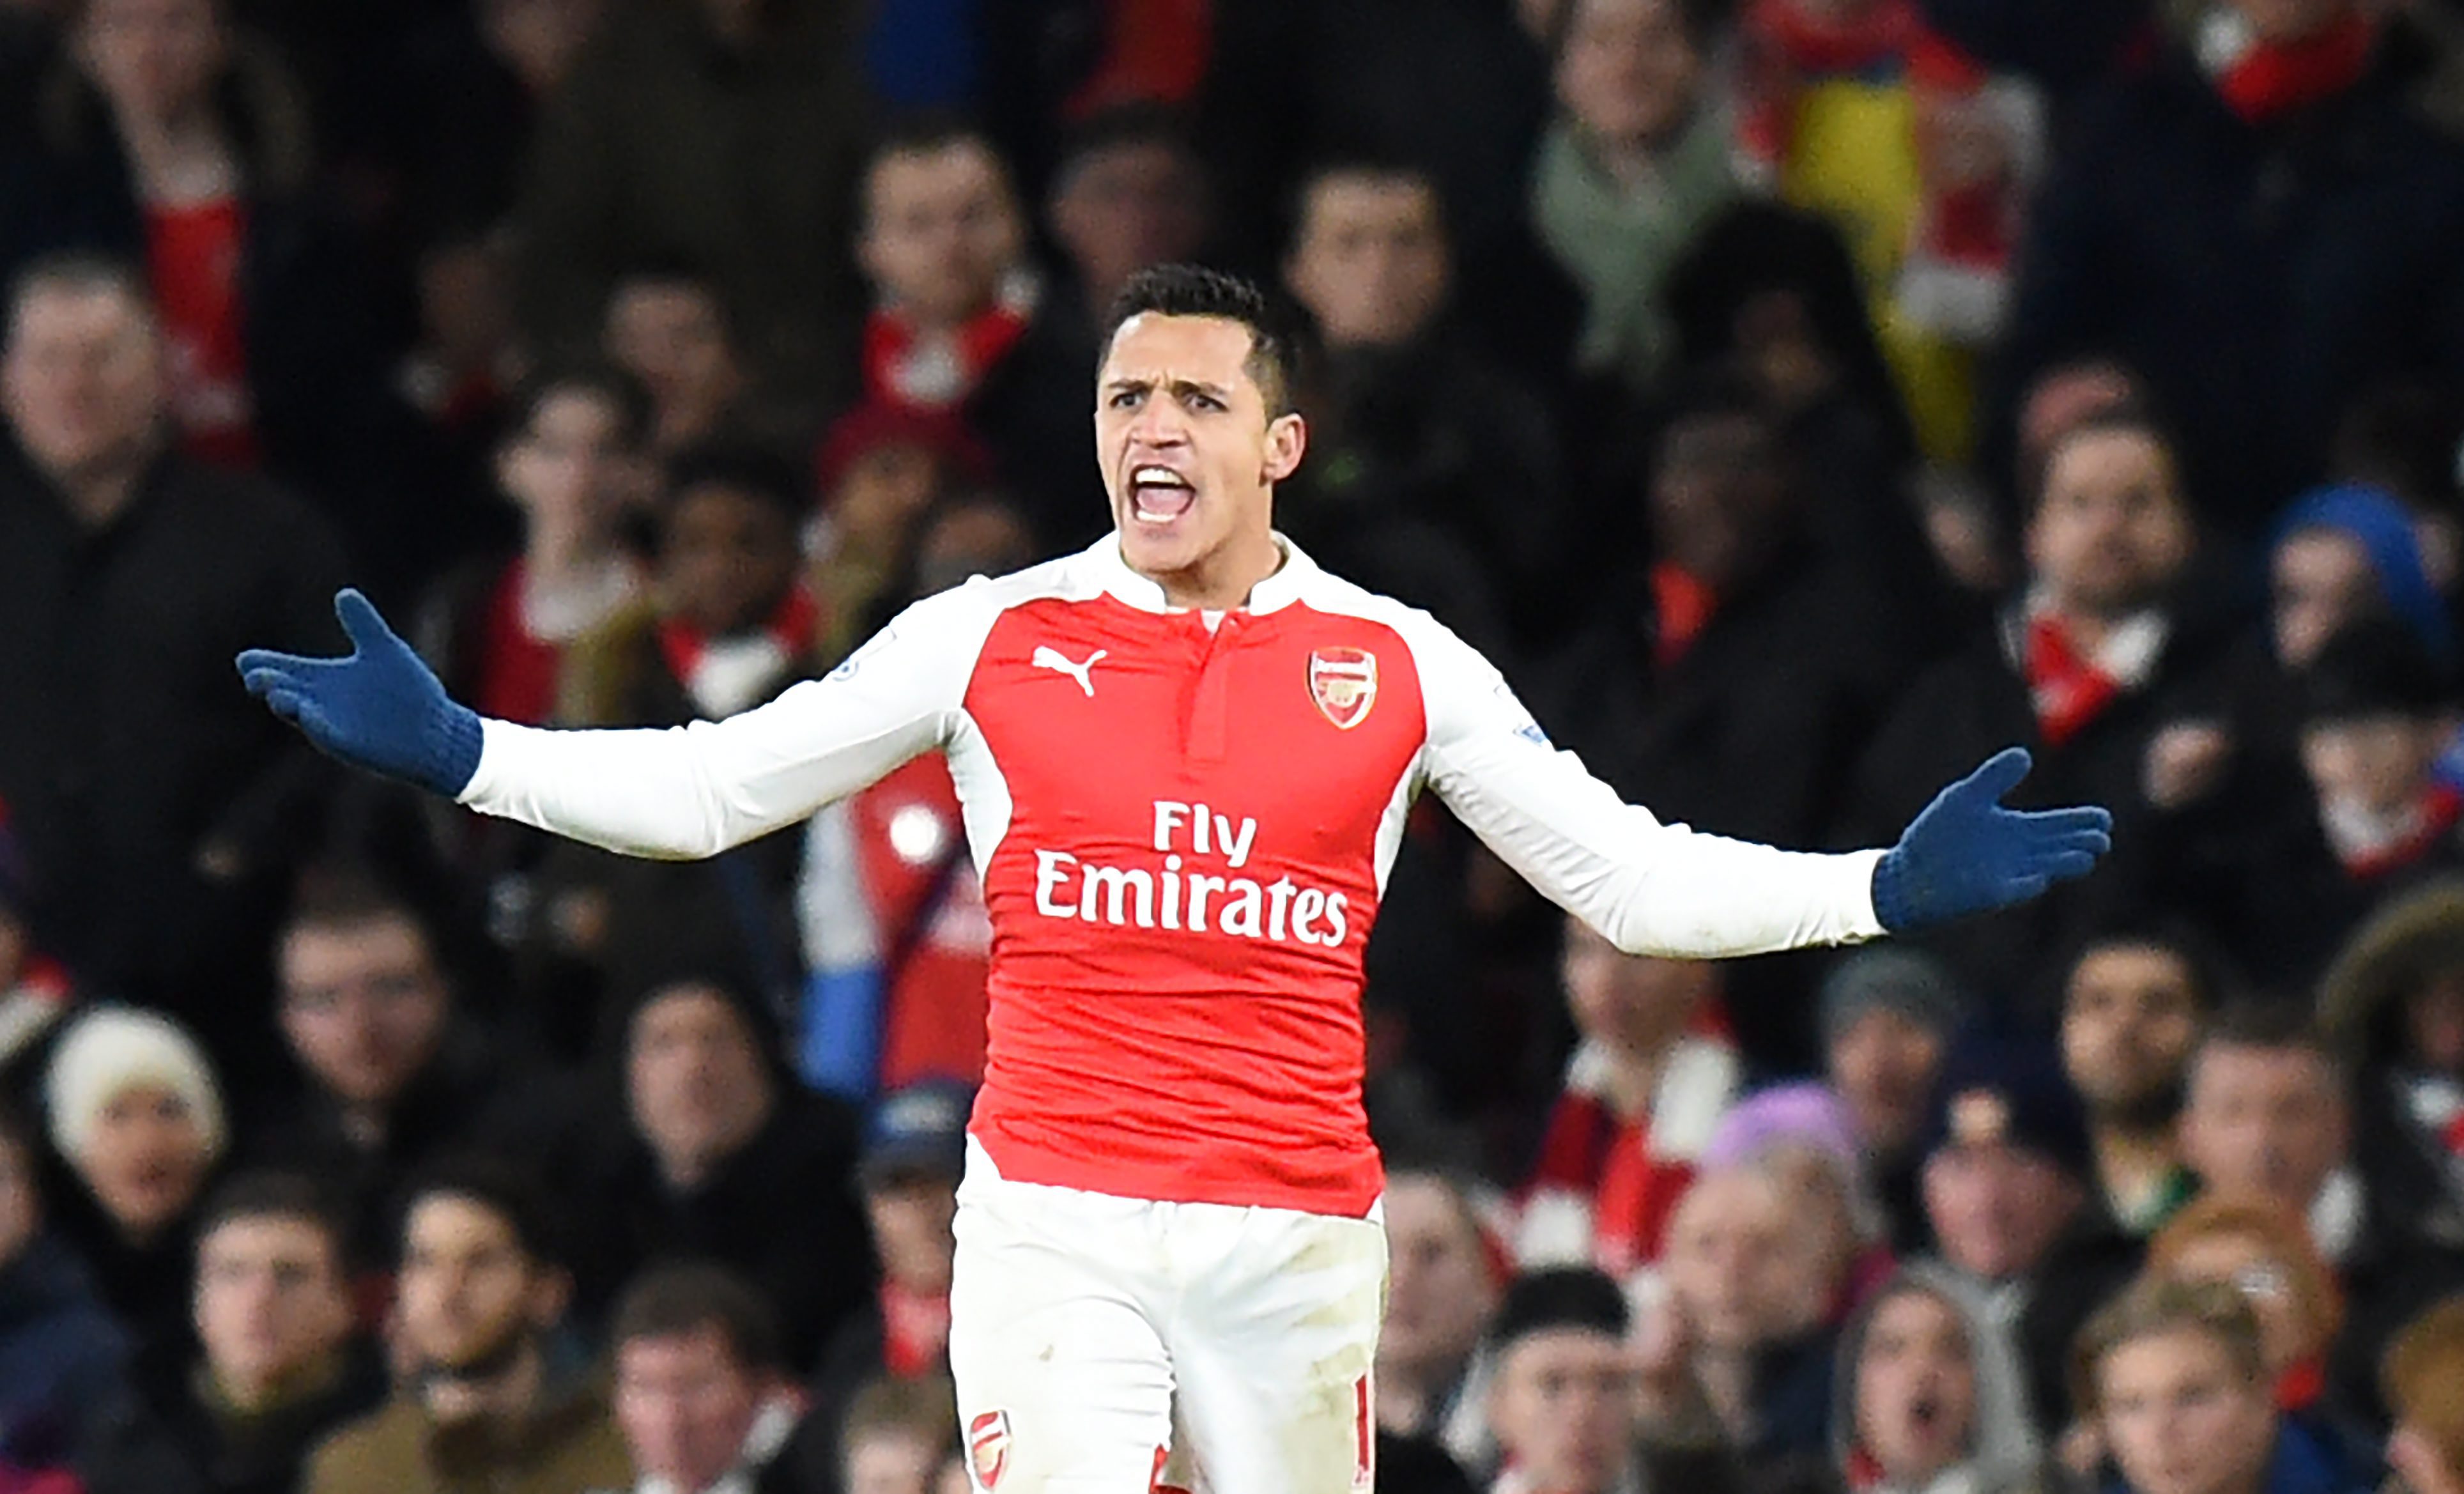 epa05140436 Arsenal Alexis Sanchez reacts during the English Premier League game between Arsenal and Southampton at the Emirates stadium in London, Britain, 02 February 2016.  EPA/FACUNDO ARRIZABALAGA EDITORIAL USE ONLY. No use with unauthorized audio, video, data, fixture lists, club/league logos or 'live' services. Online in-match use limited to 75 images, no video emulation. No use in betting, games or single club/league/player publications